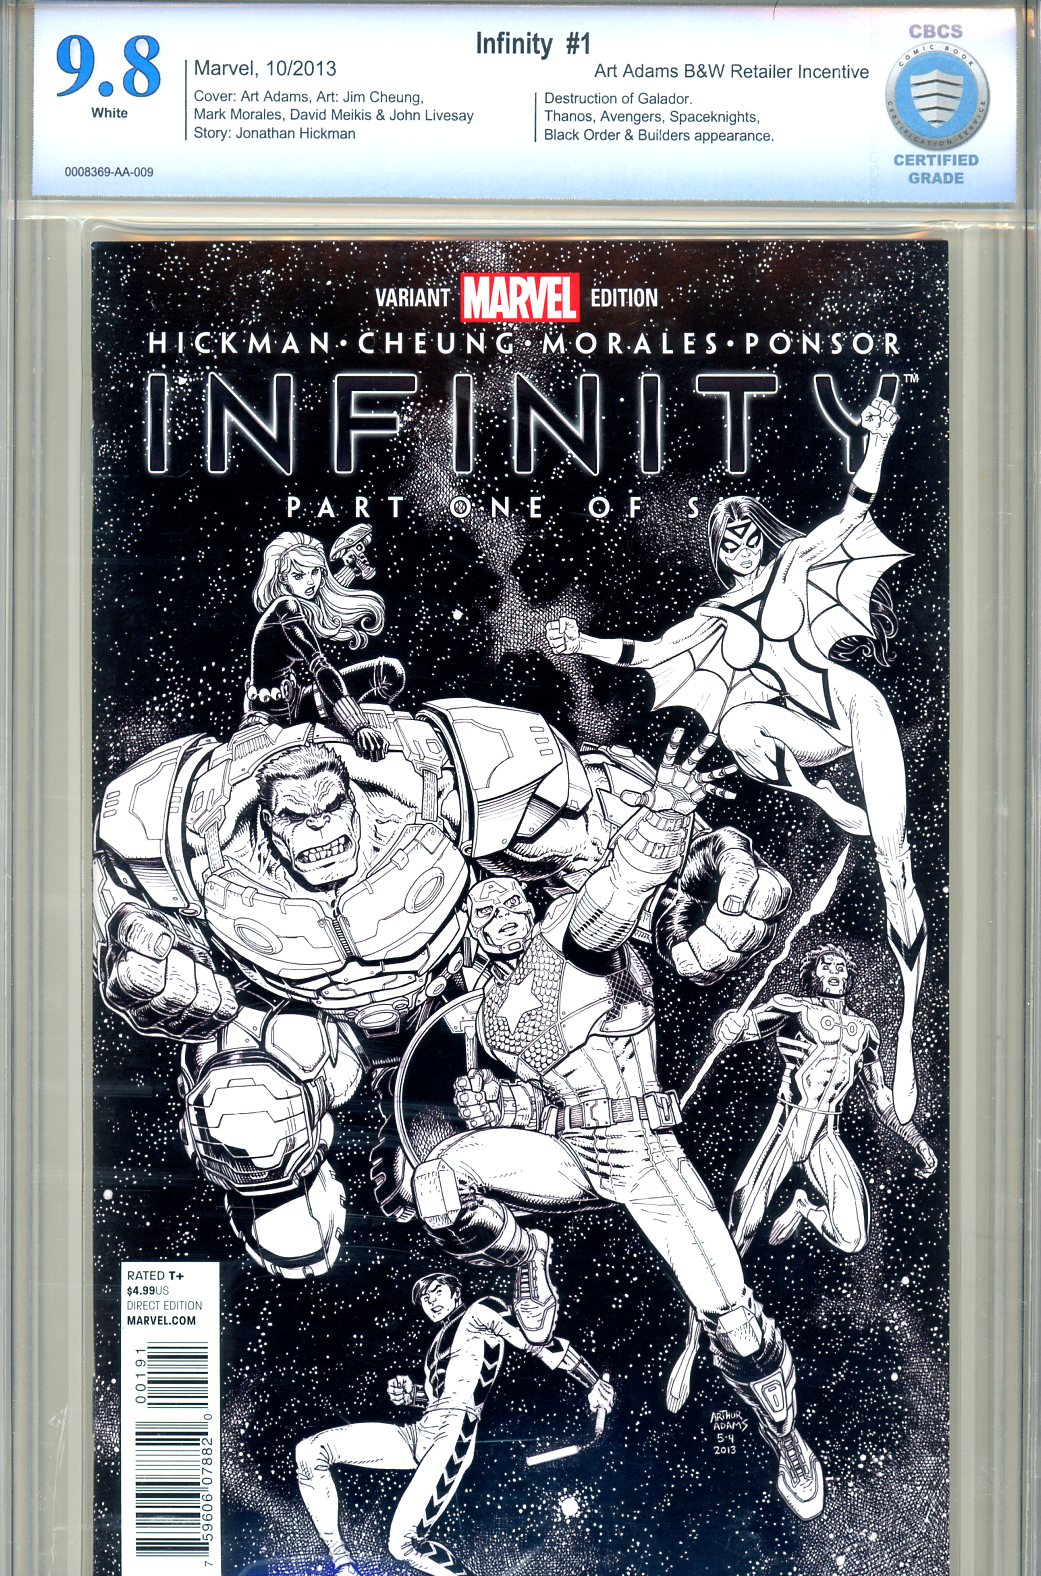 Infinity #1 CBCS 9.8 w Retailer Incentive Edition